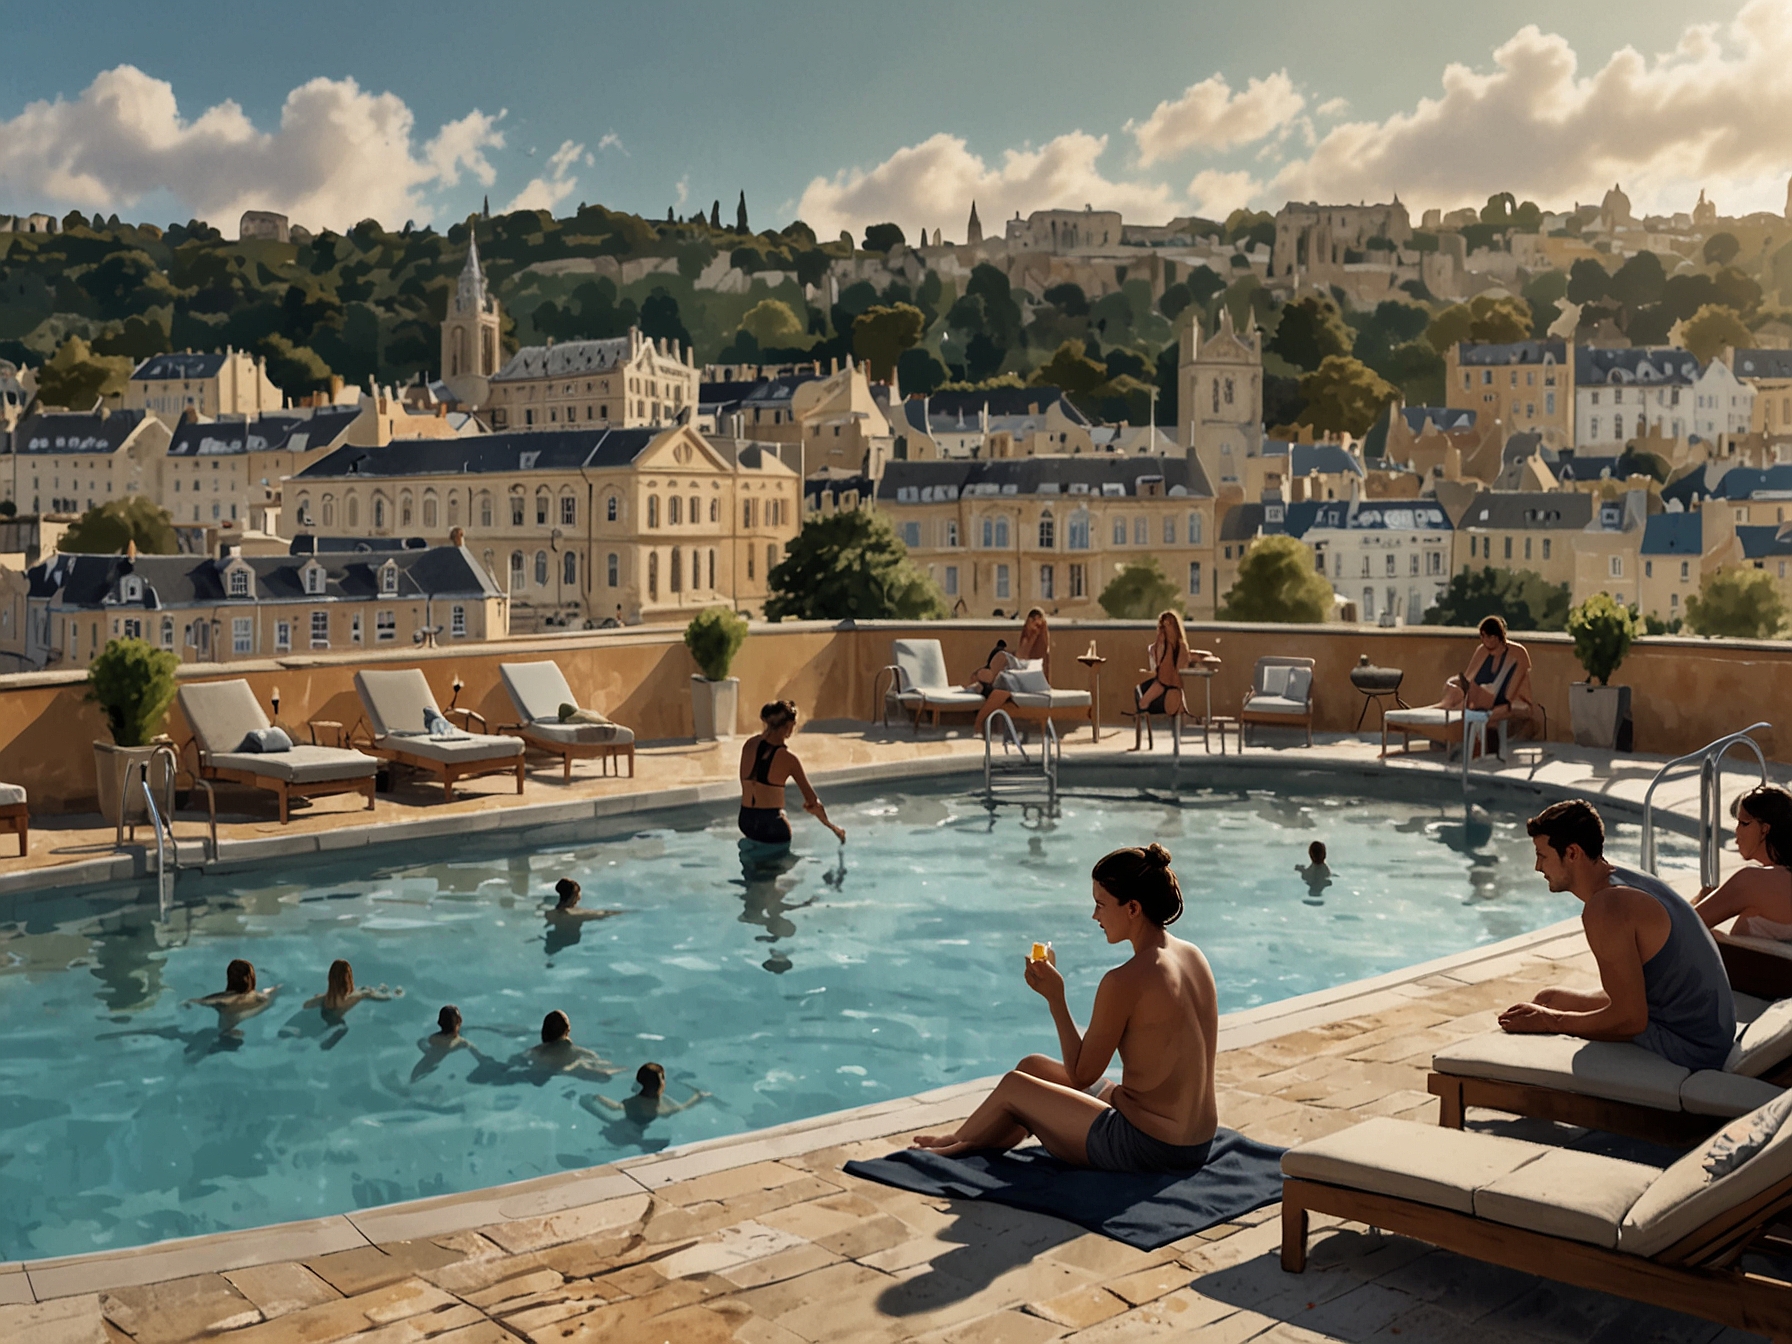 Visitors enjoying the warm, mineral-rich waters of the Thermae Bath Spa's rooftop pool, with a panoramic view of Bath's cityscape and surrounding hills, highlighting a relaxing staycation experience.